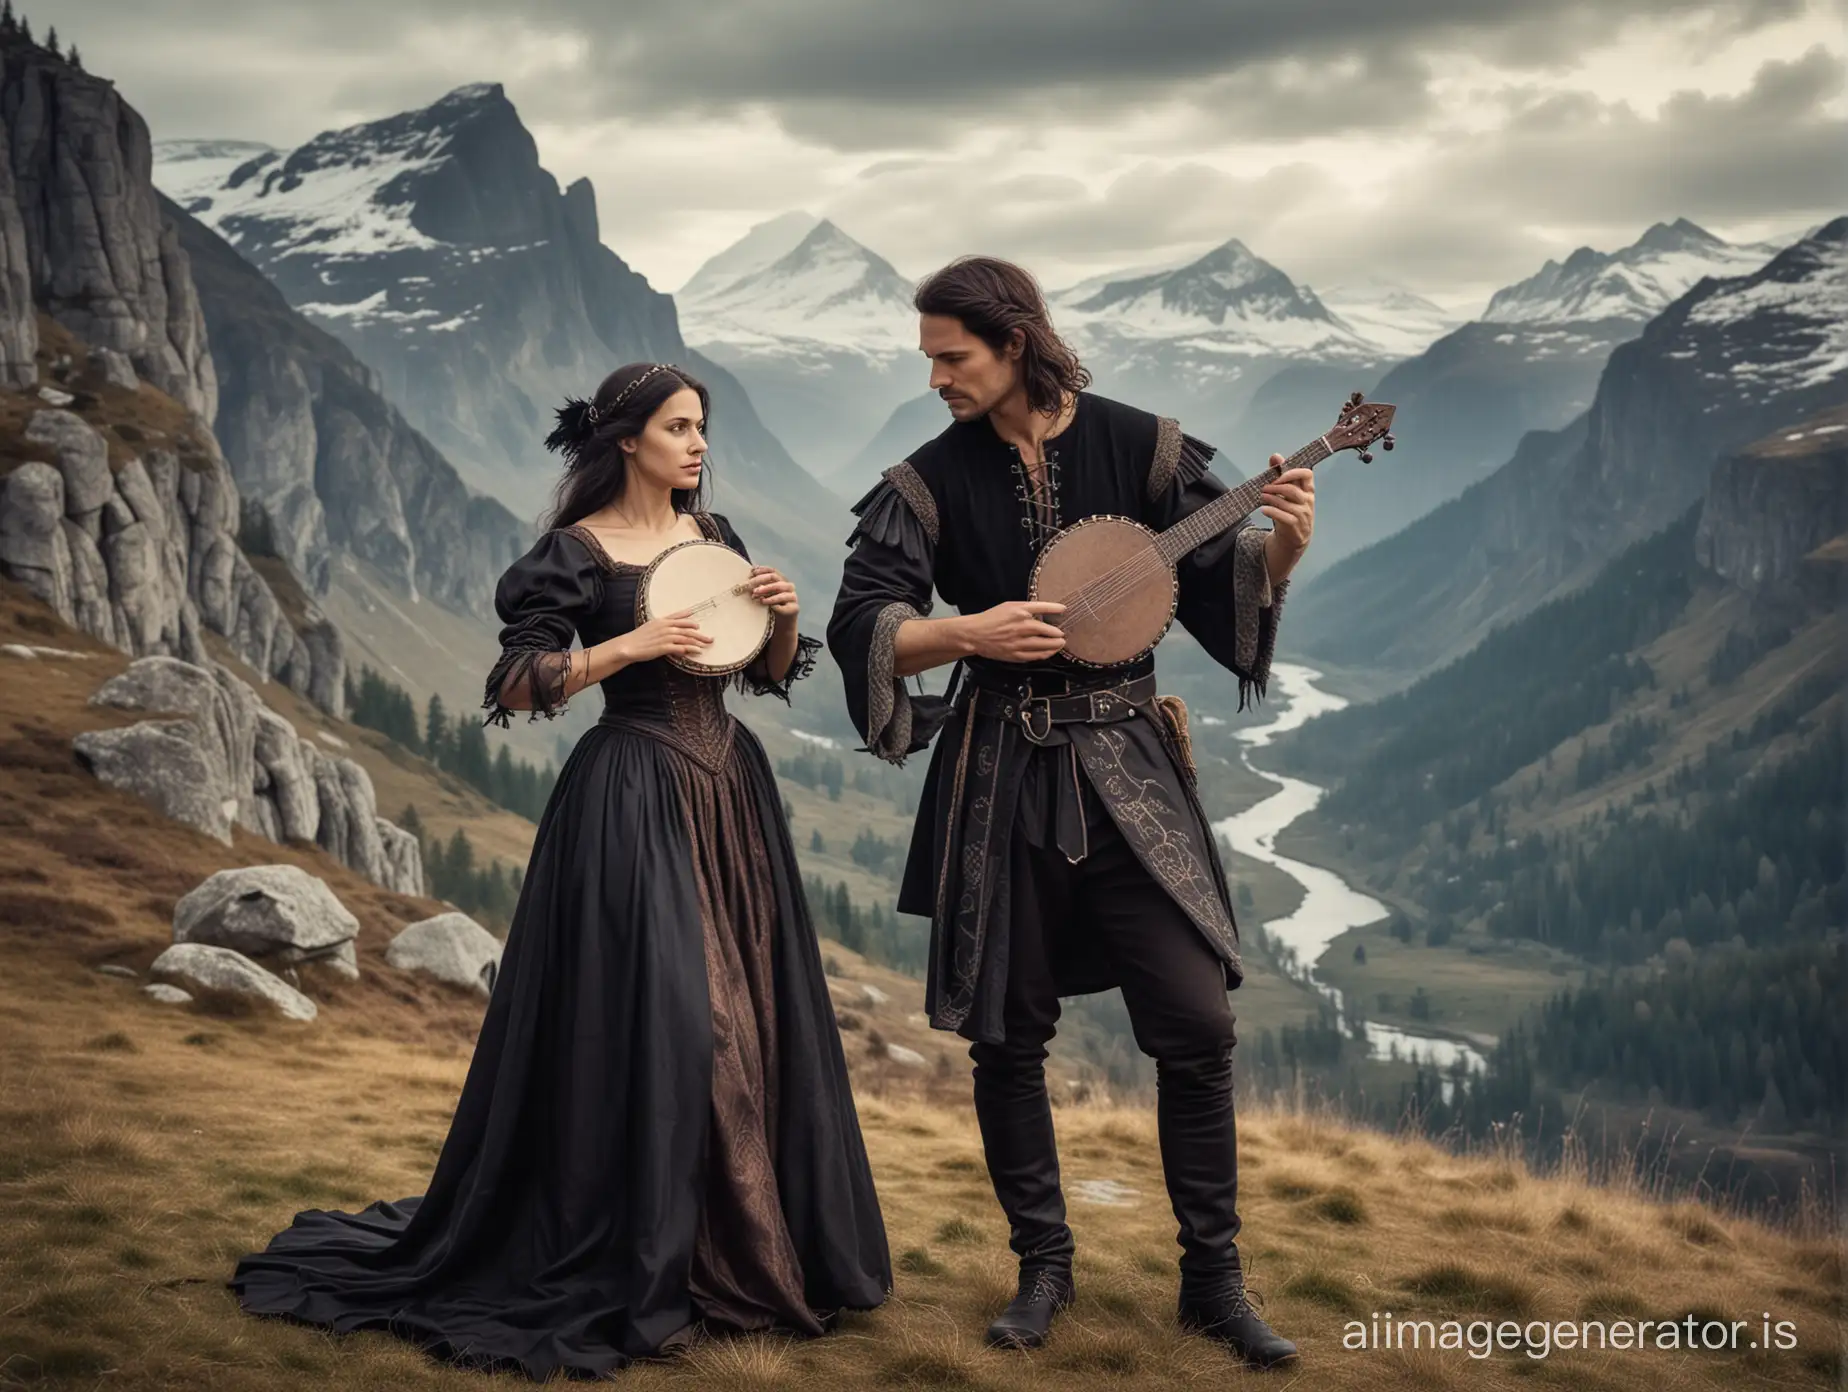 slender dark haired Nordic woman and man wearing medieval witch clothing playing small lyre and hand drum with a mountain background